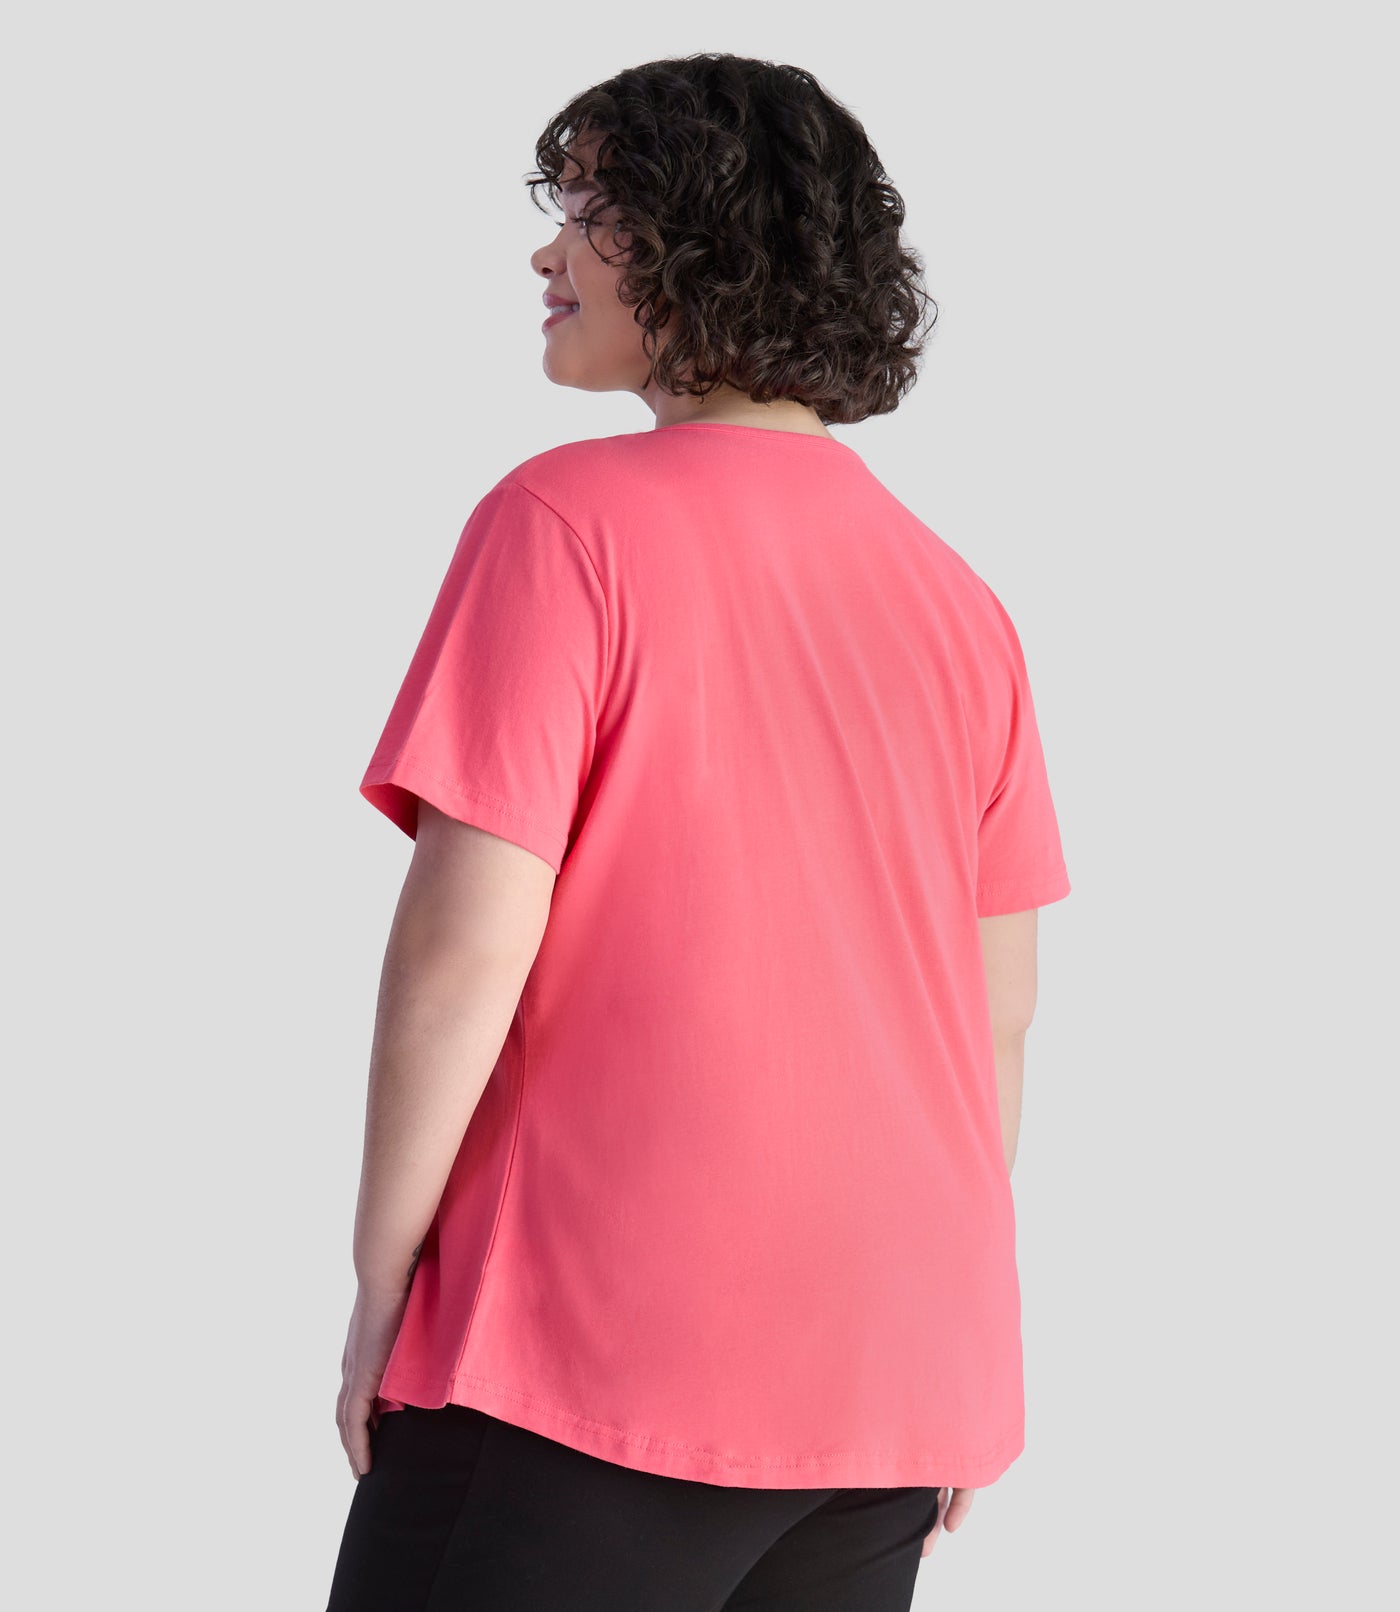 Model is back forward with her arms by her side. She is wearing JunoActive's Designer Graphic scoop neck in color carnation pink.